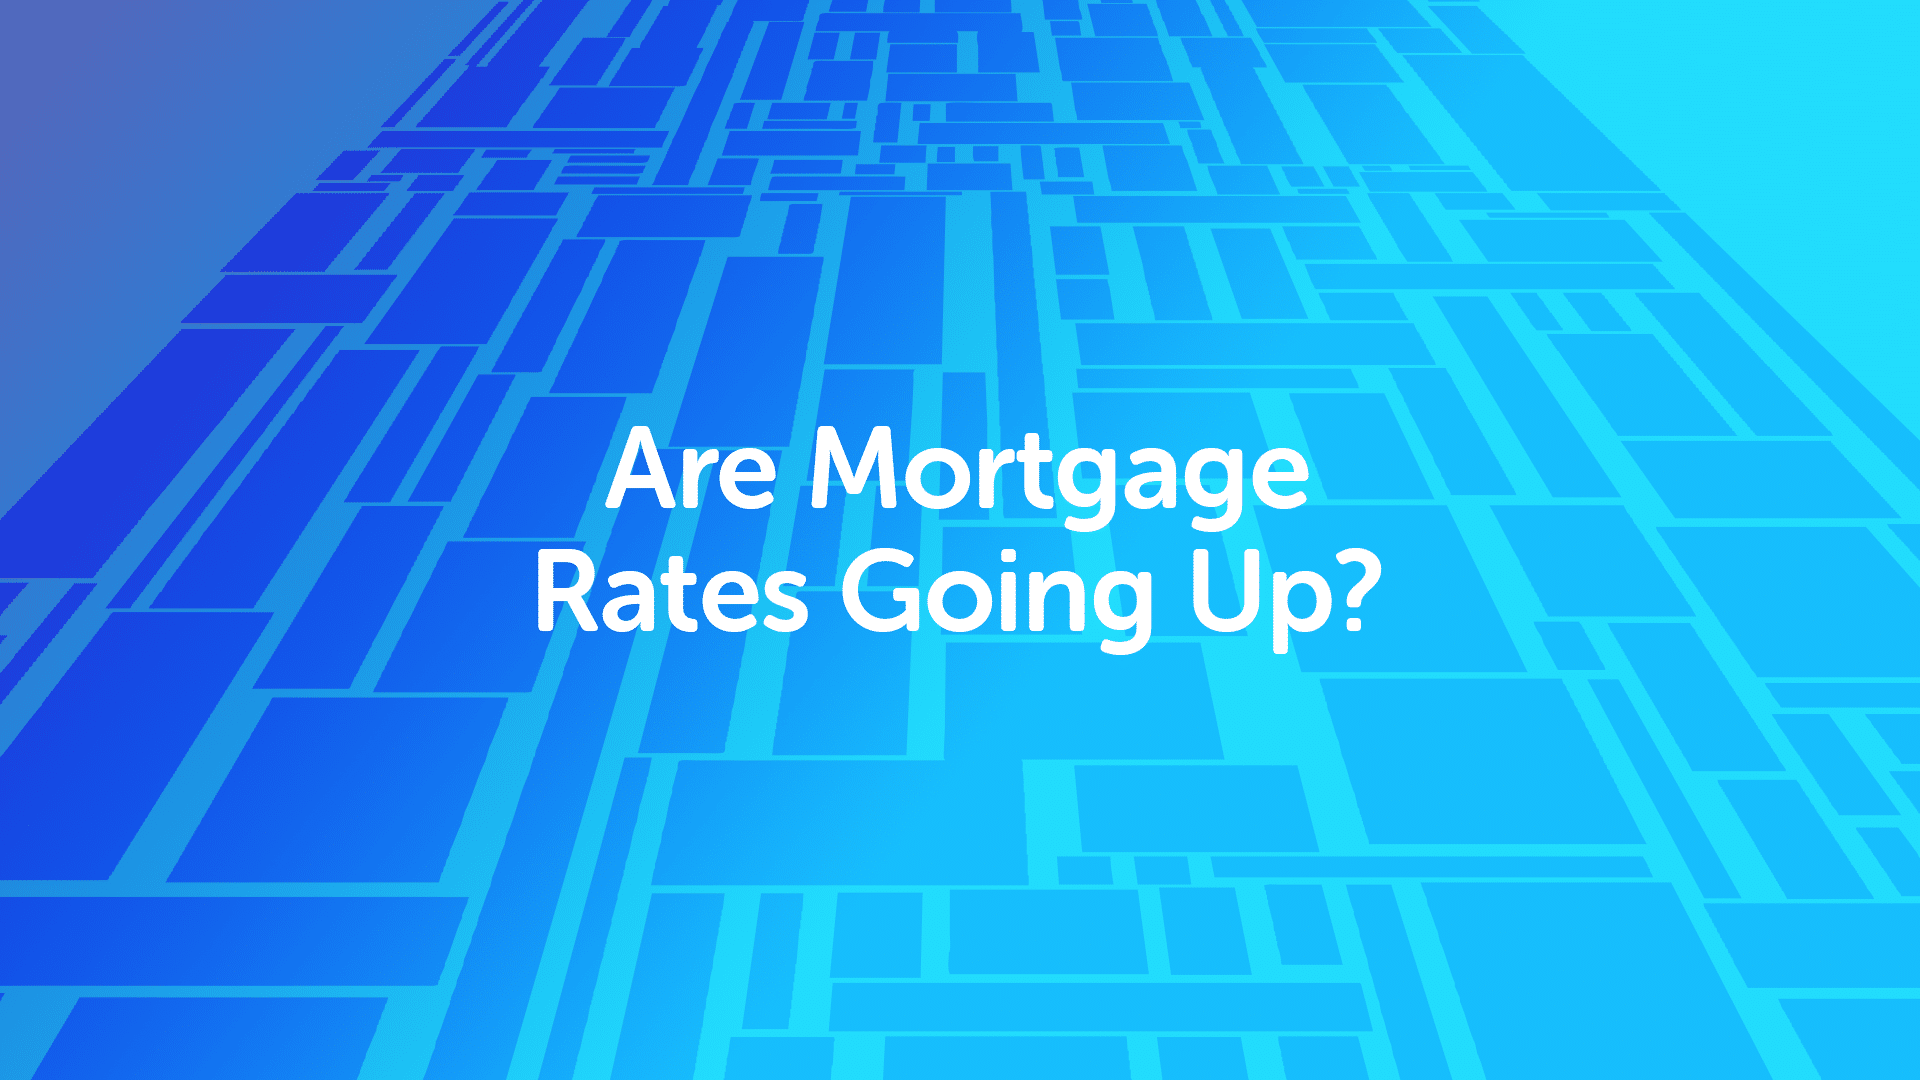 Are Mortgage Rates Going Up?